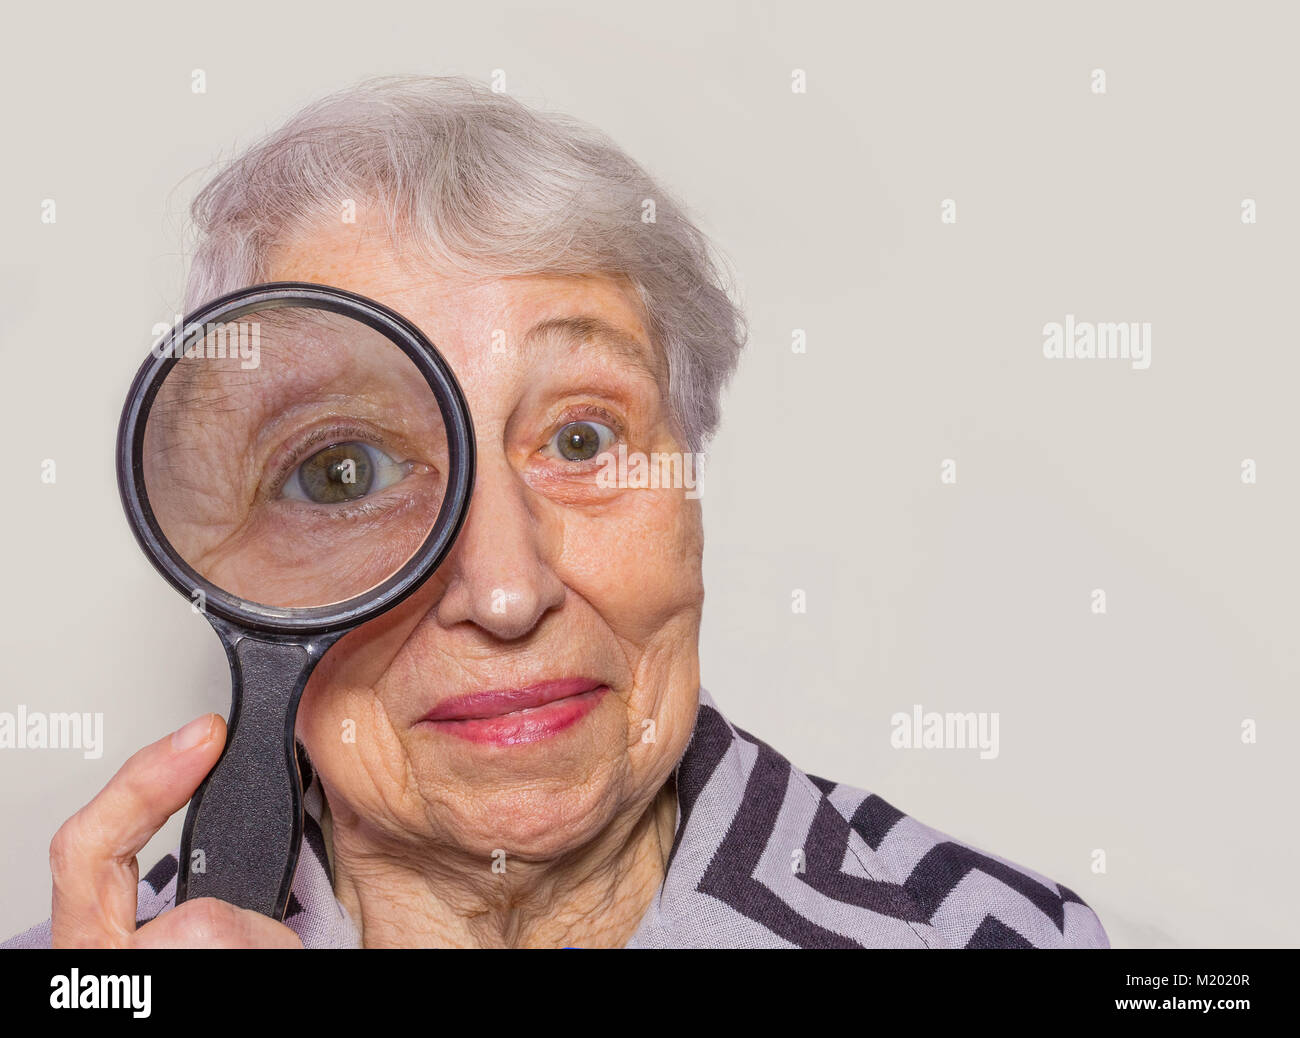 portrait of senior woman looking through a magnifying glass over white background Stock Photo